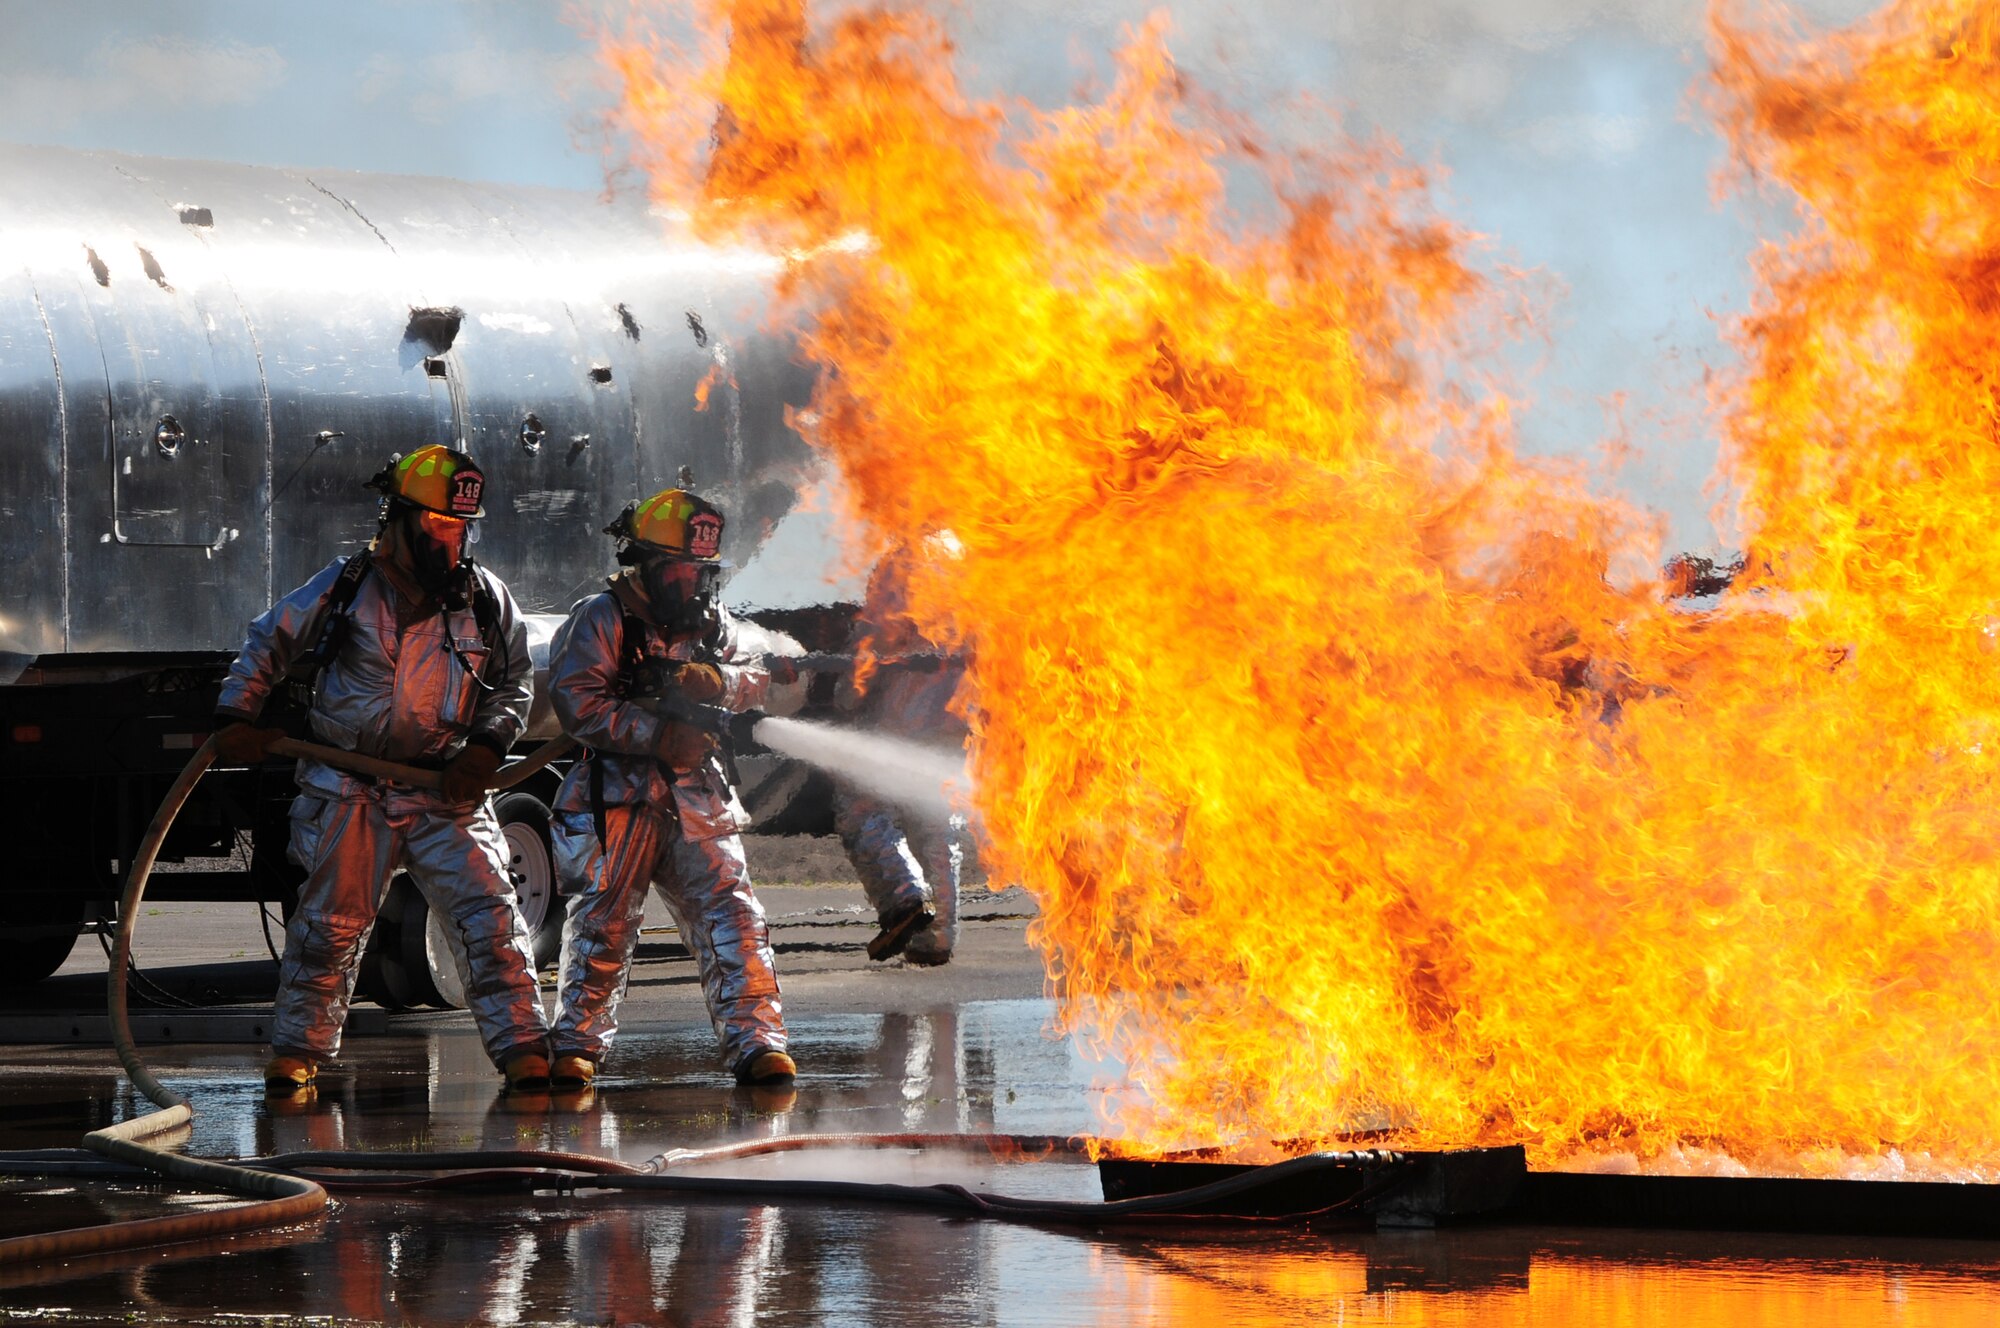 U.S. Air National Guard Fire Fighter Aaron Nelson and Tech. Sgt Nick Downs, 148th Fighter Wing, fight a fire during a Major Accident Response Exercise (MARE) of a commercial airliner crash at the  Duluth International Airport, Minn., June 3, 2010. The MARE was held in conjunction with local, state and federal emergency response agencies to test and validate emergency response capabilities. (U.S. Air Force photo by Master Sgt. Jason W. Rolfe/Released)